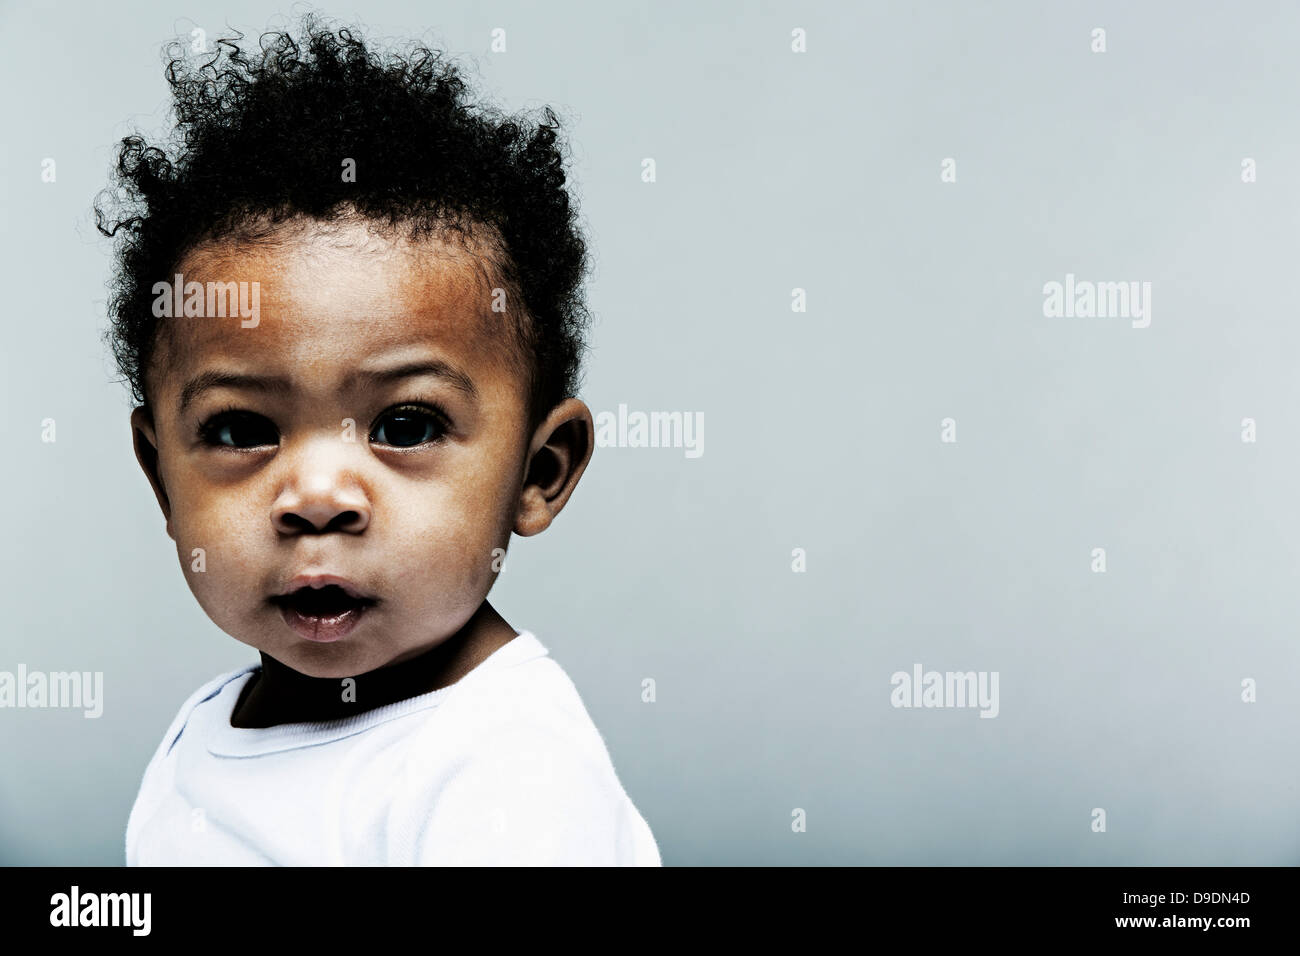 Portrait of baby boy wearing white looking at camera Banque D'Images